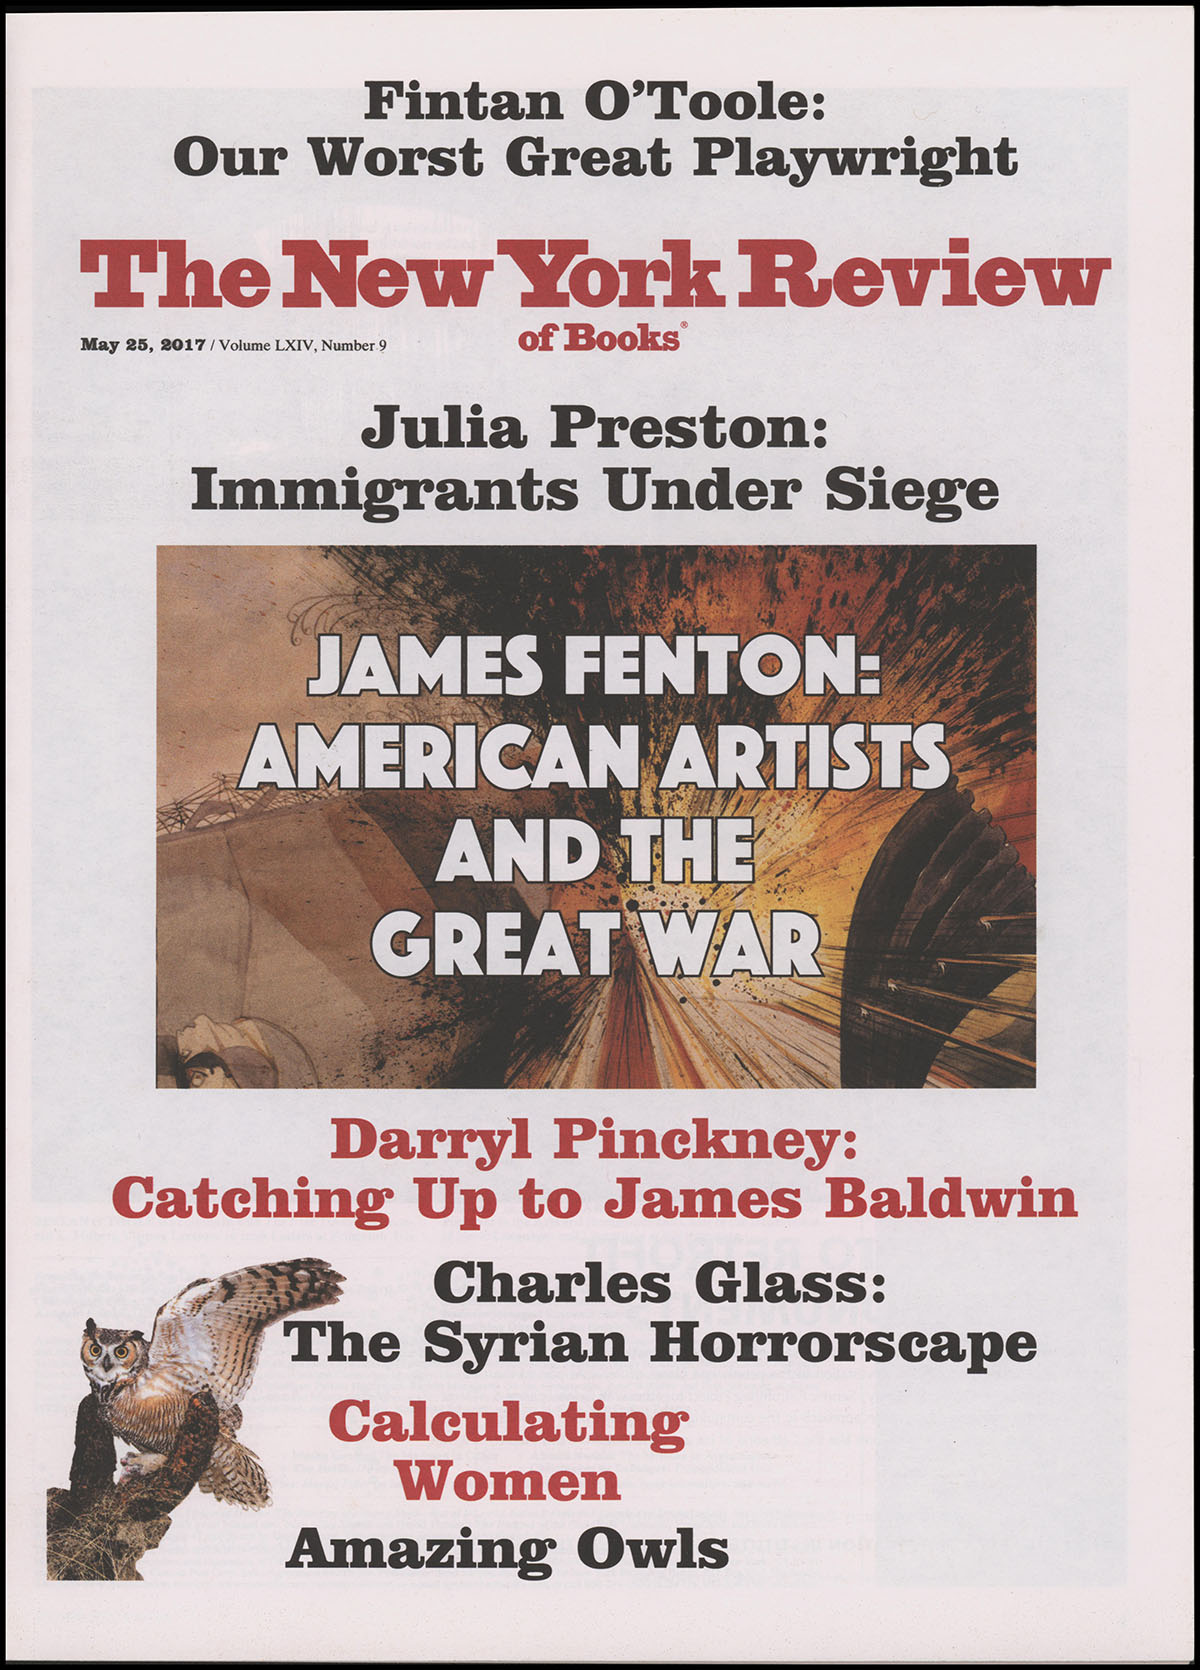 The New York Review of Books - The New York Review of Books (May 25, 2017, Vol LXIV, No 9)